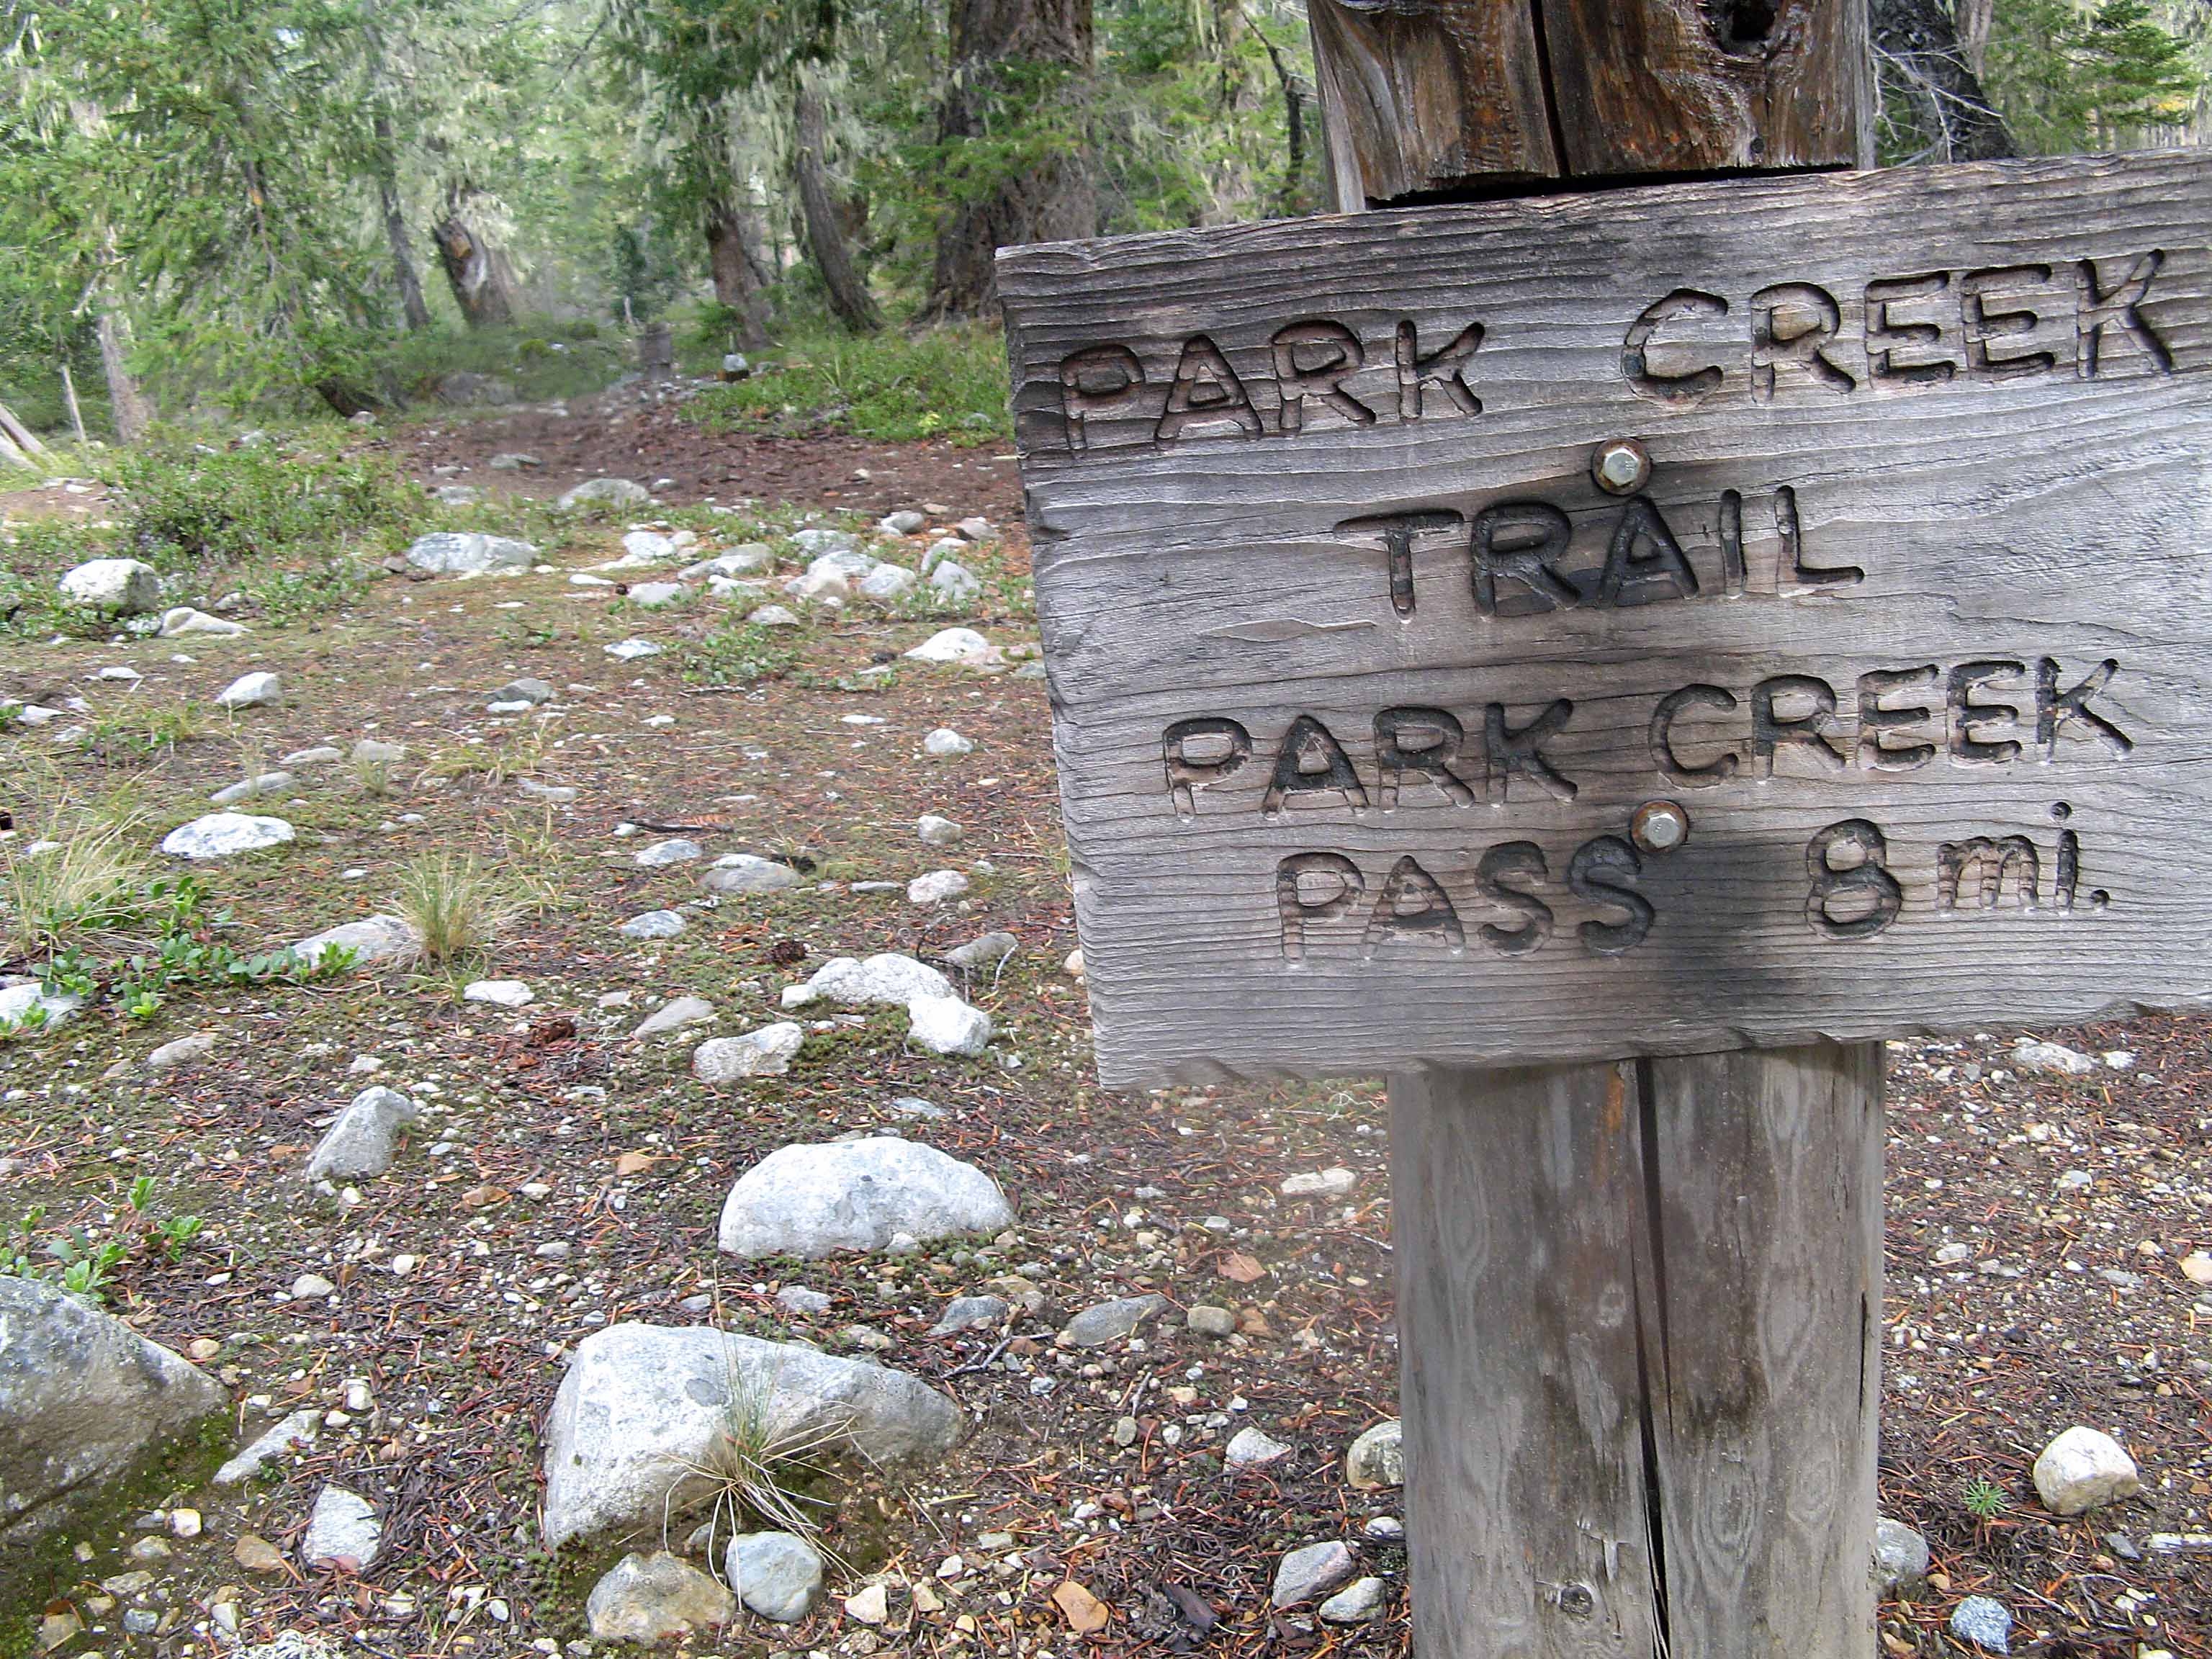 Park Creek Trailhead ( Very Limited Access WIth Road Closure )